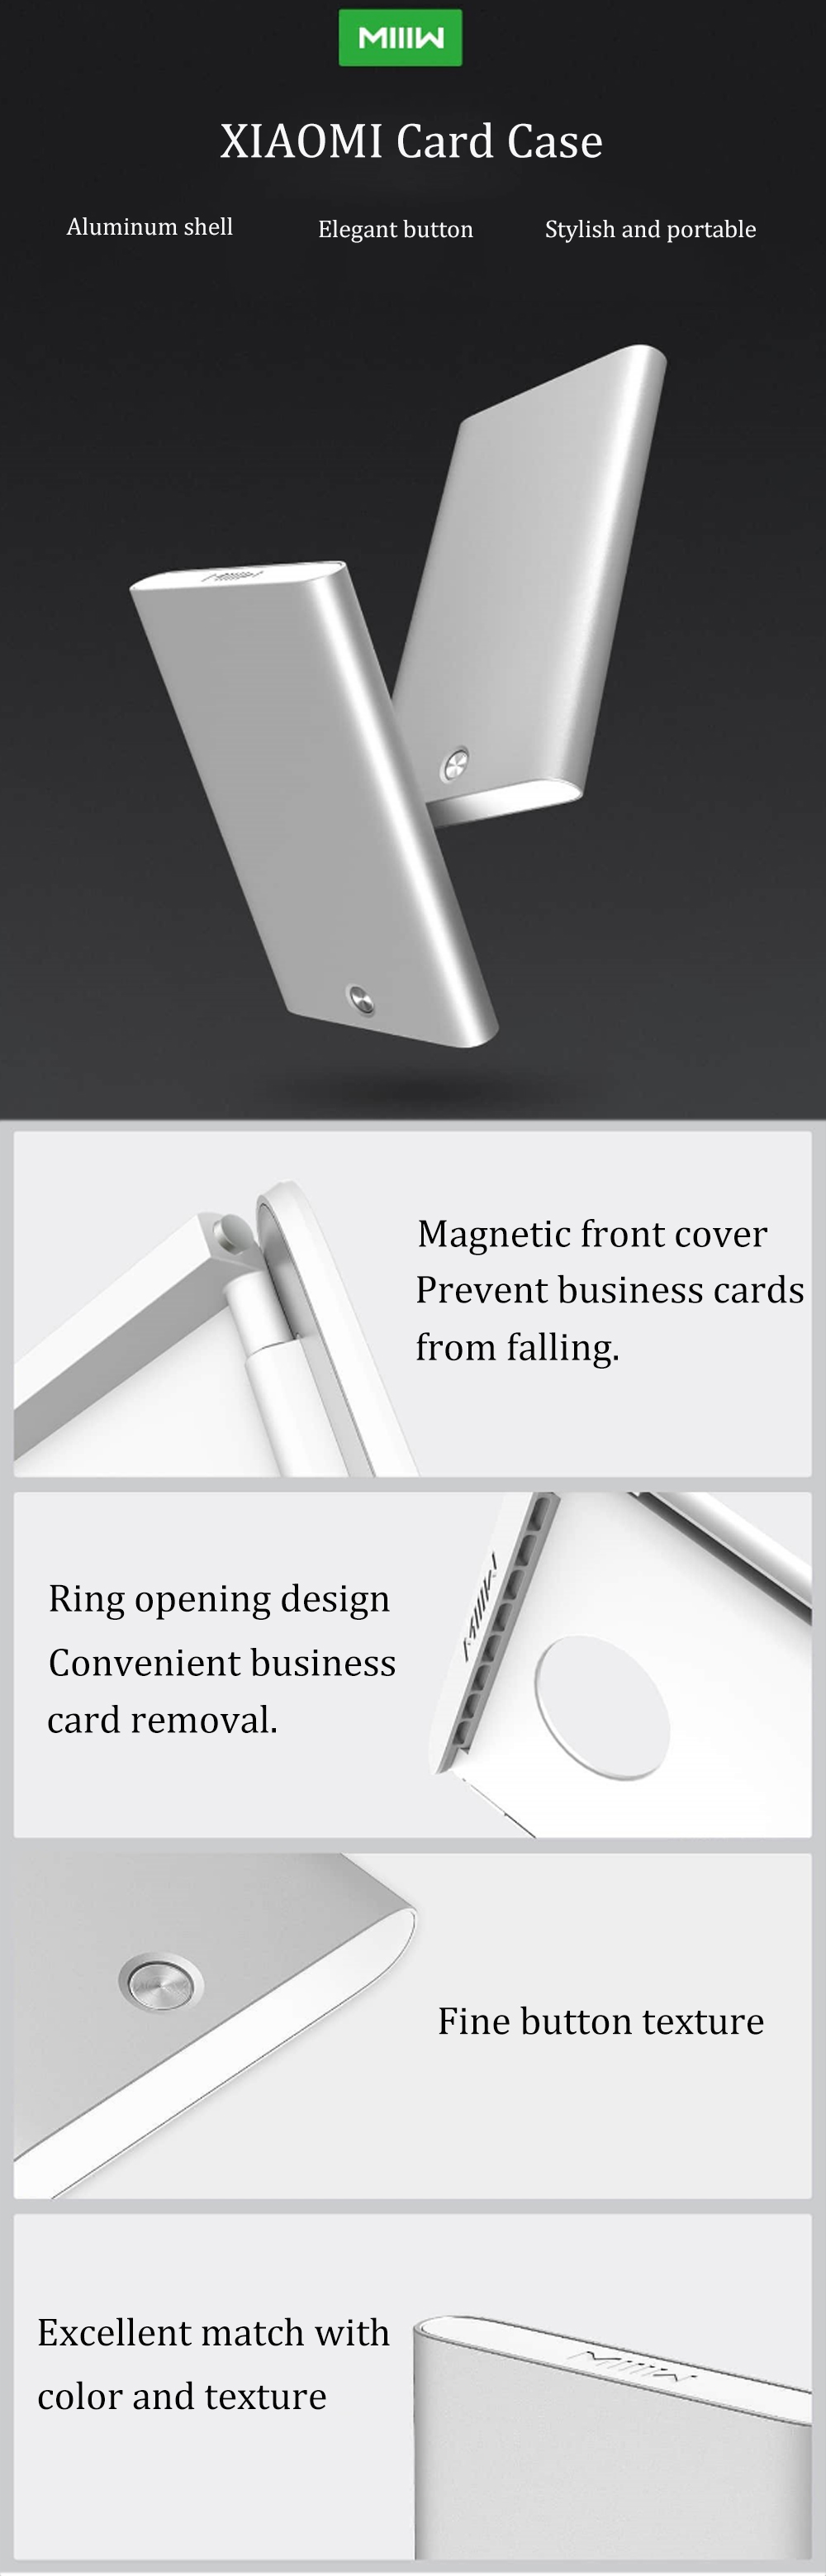 Xiaomi MIIIW Automatic Business Card Holder Slim Metal Name Card Credit Card Case Storage Box 13